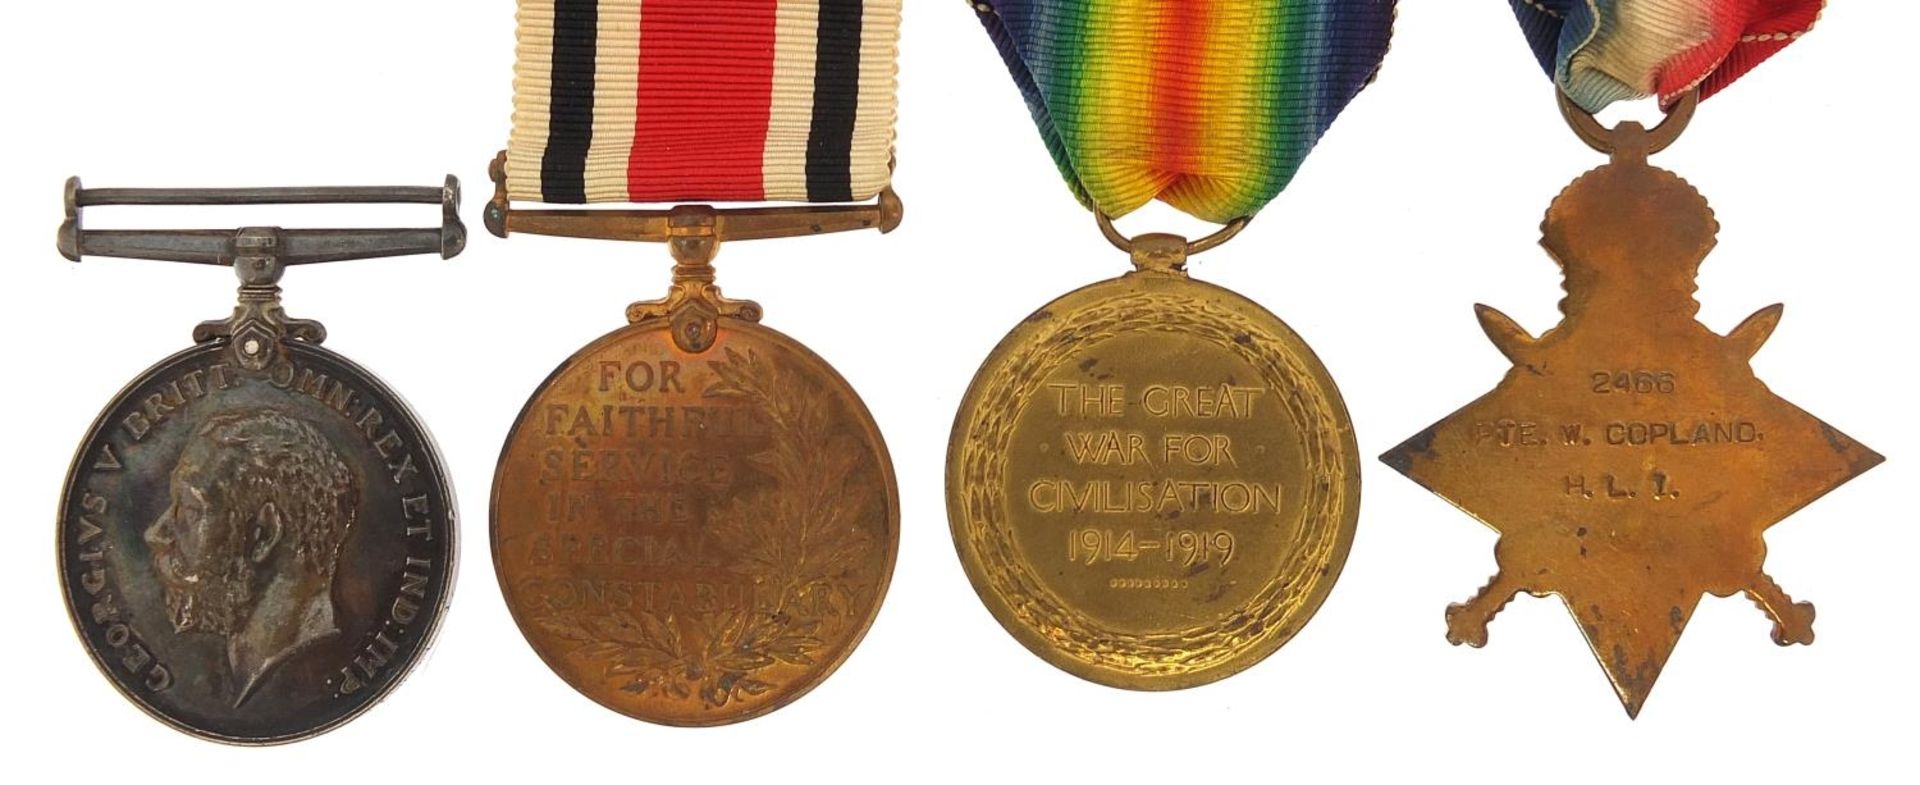 British military World War I four medal group awarded to 2466 CPL.W.COPLAND.HIGH.L.I. - Image 3 of 6